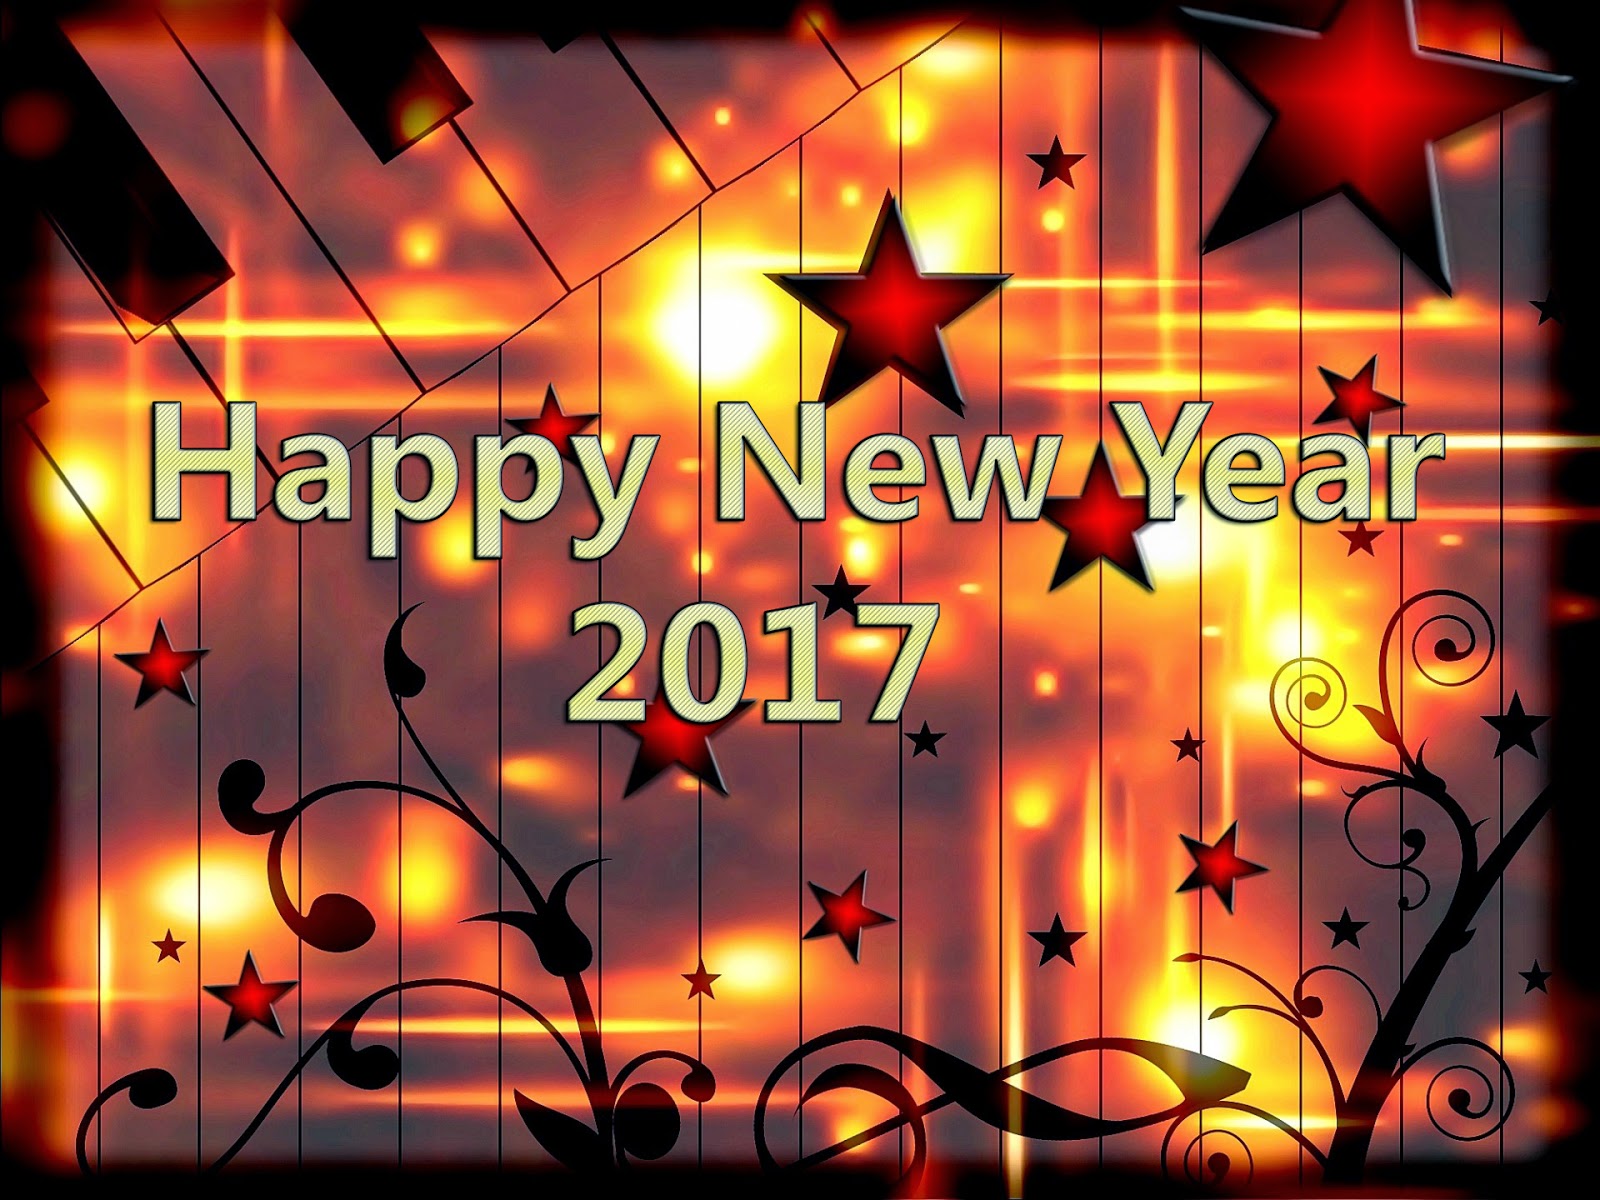 Happy-new-year 2017 images